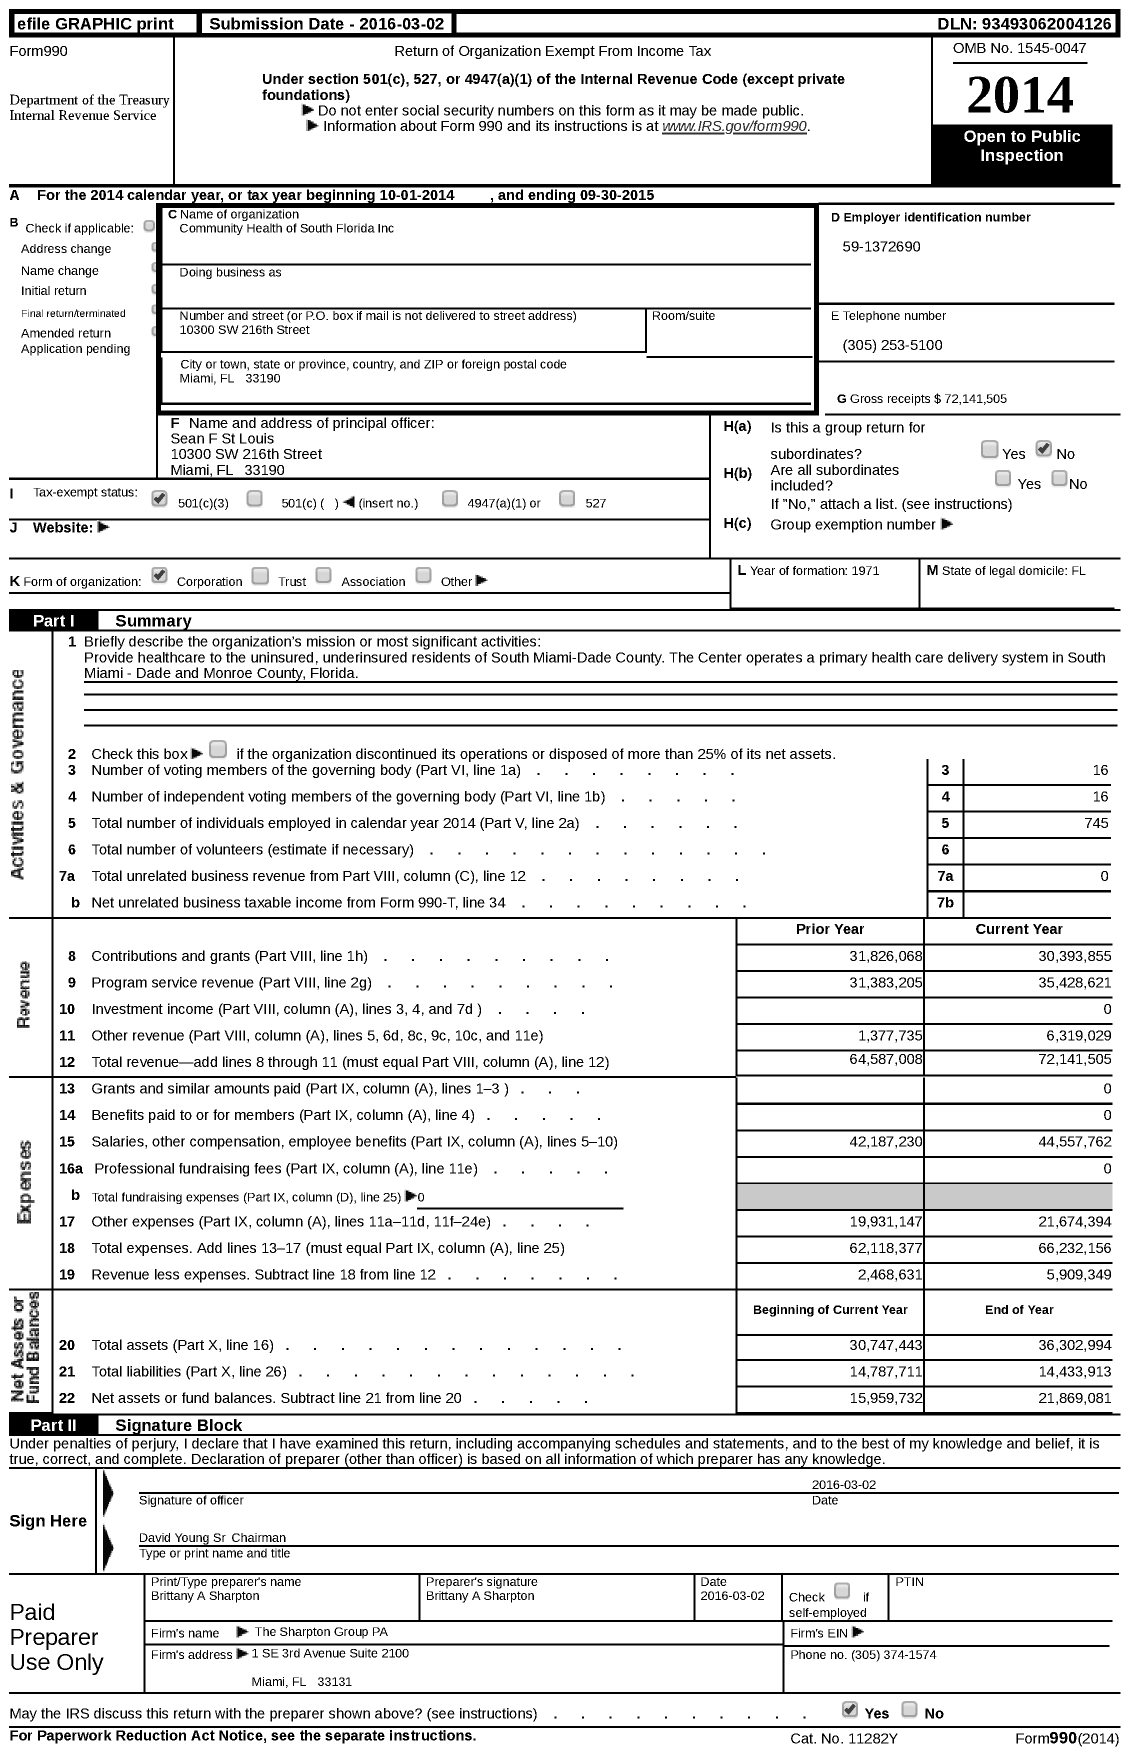 Image of first page of 2014 Form 990 for Community Health of South Florida Incorporated (CHI)